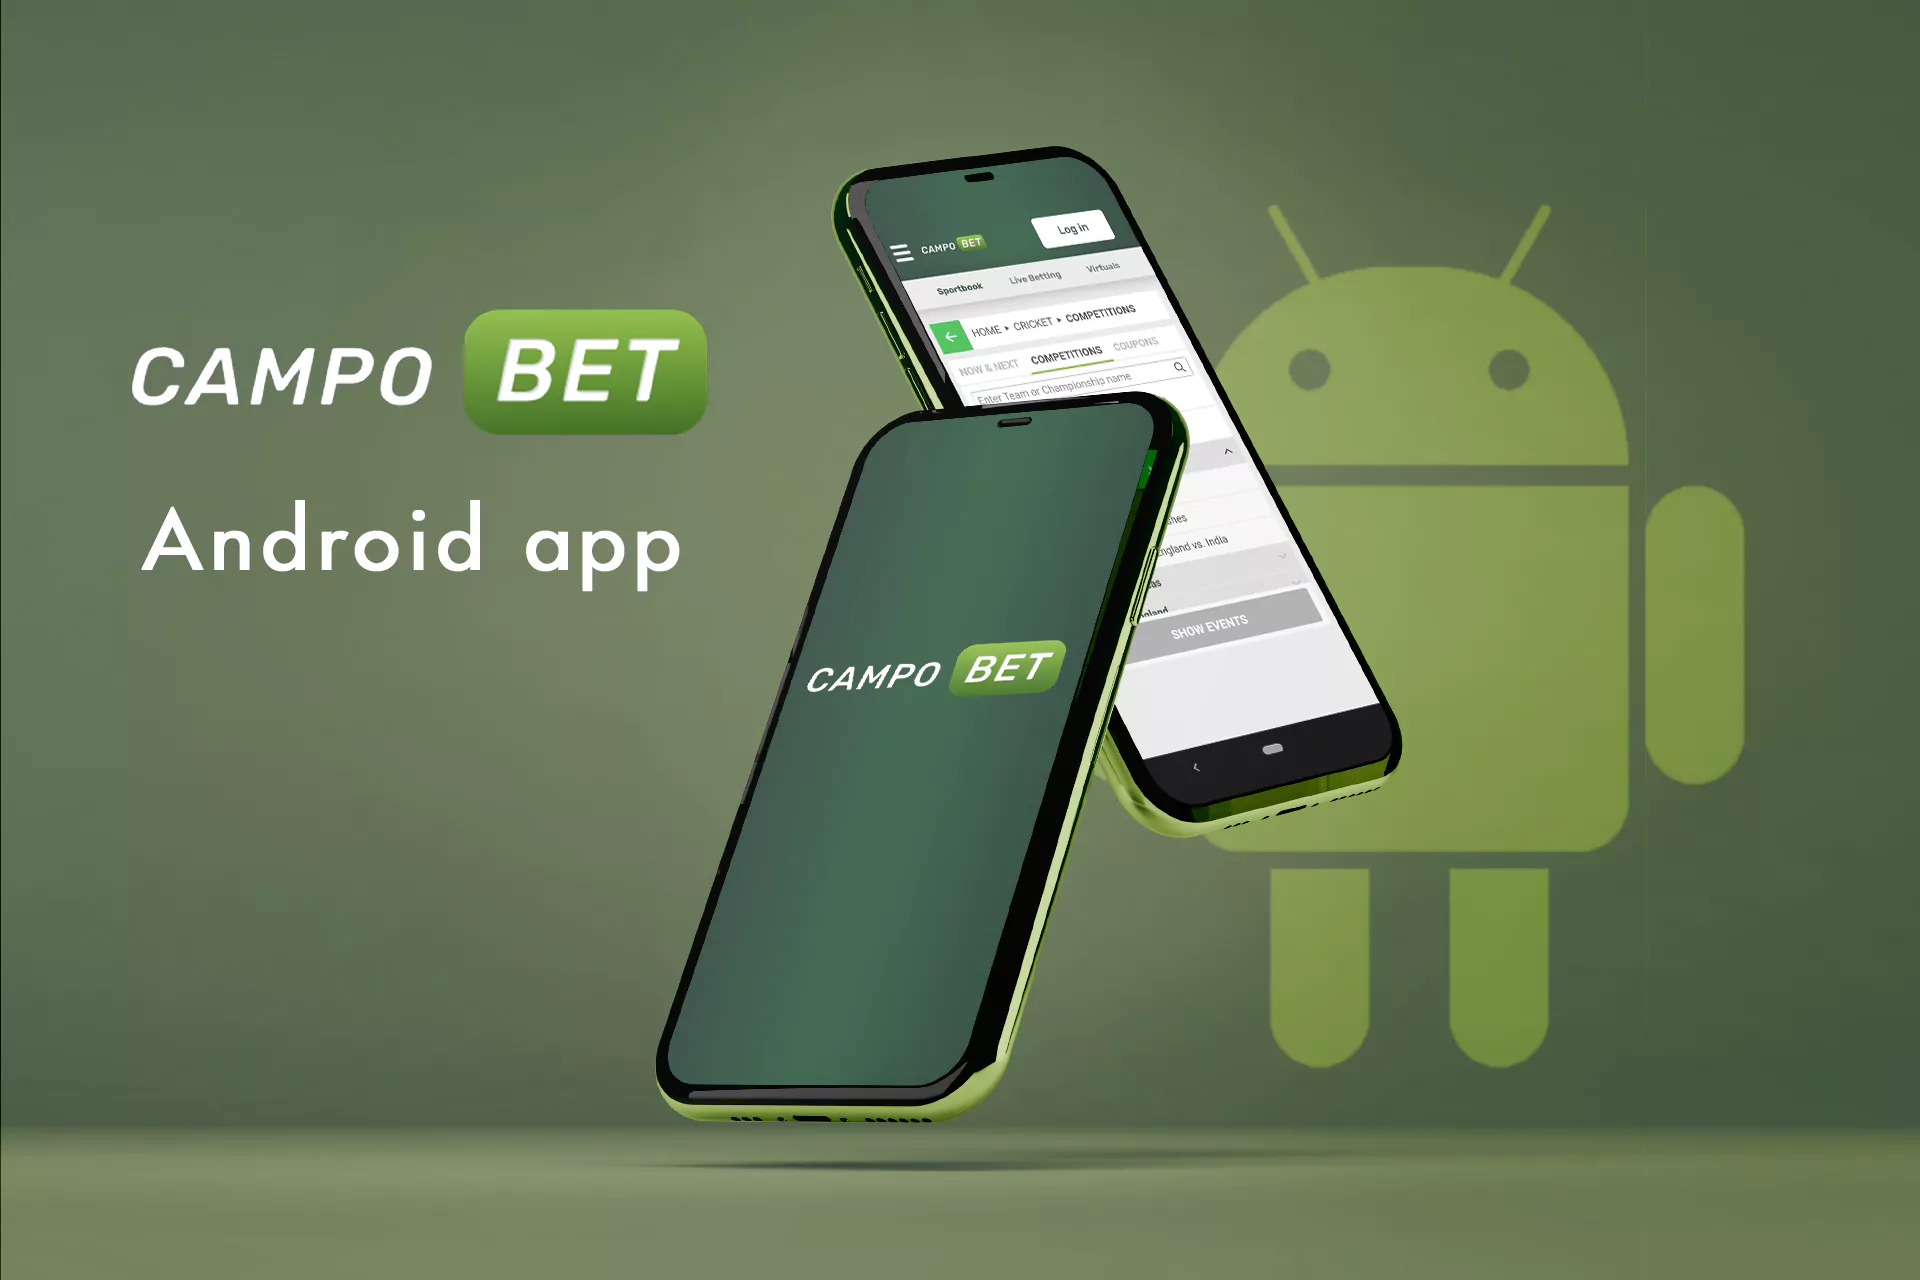 The Campobet team creates the Android app.